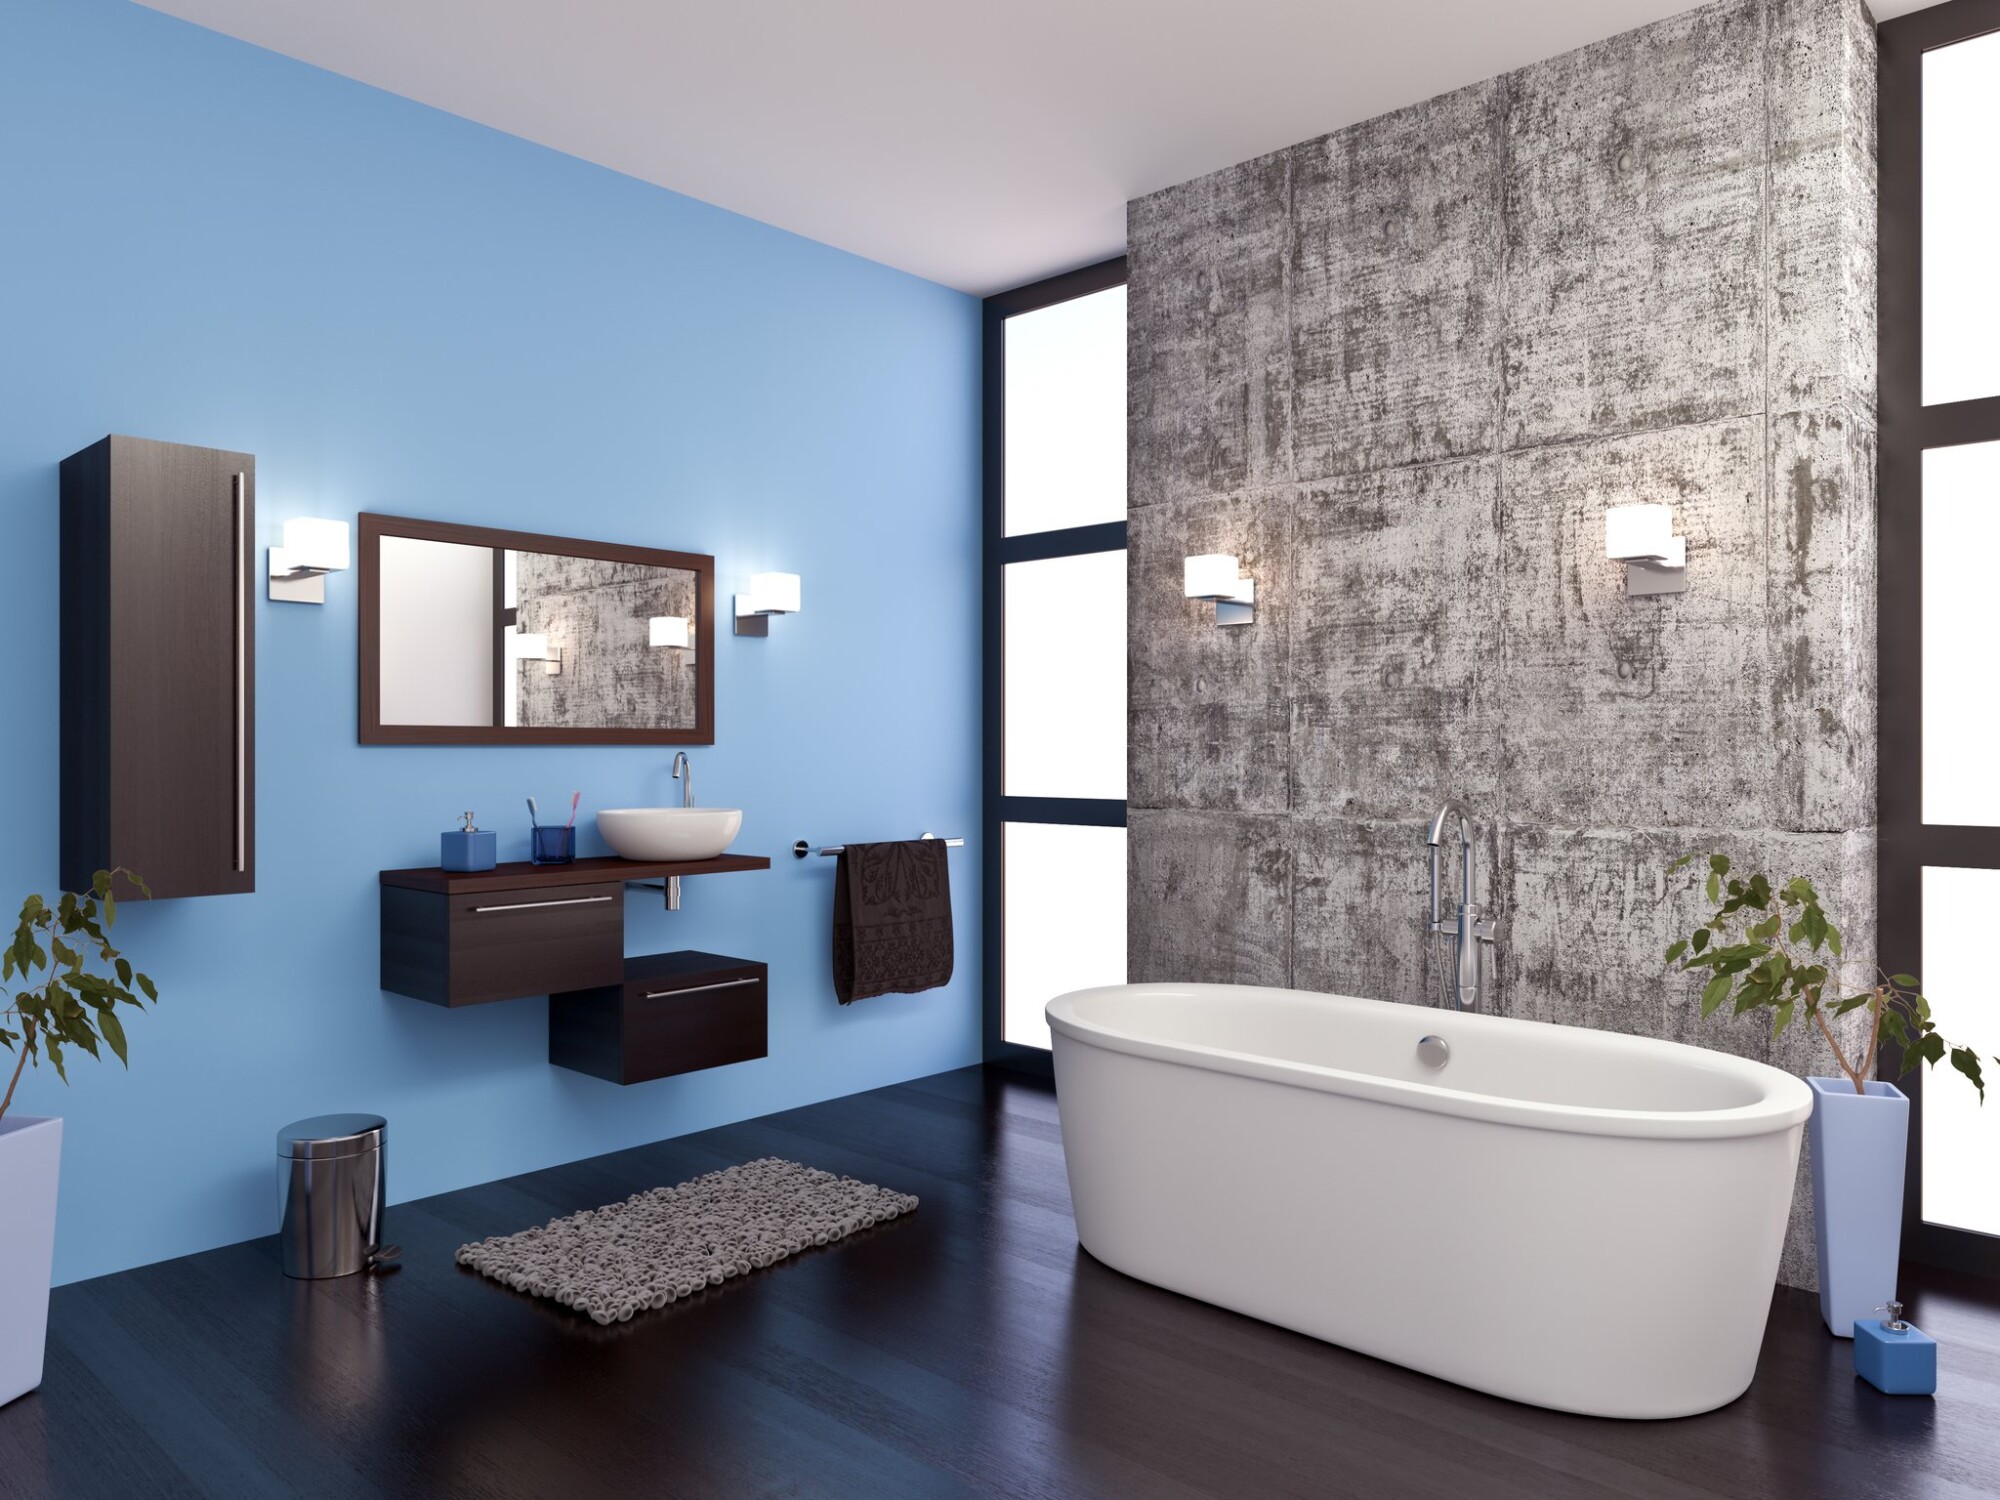 Stay ahead of the curve with these aesthetic bathroom trends for 2024. Explore the latest design ideas to transform your bathroom into a stylish oasis.